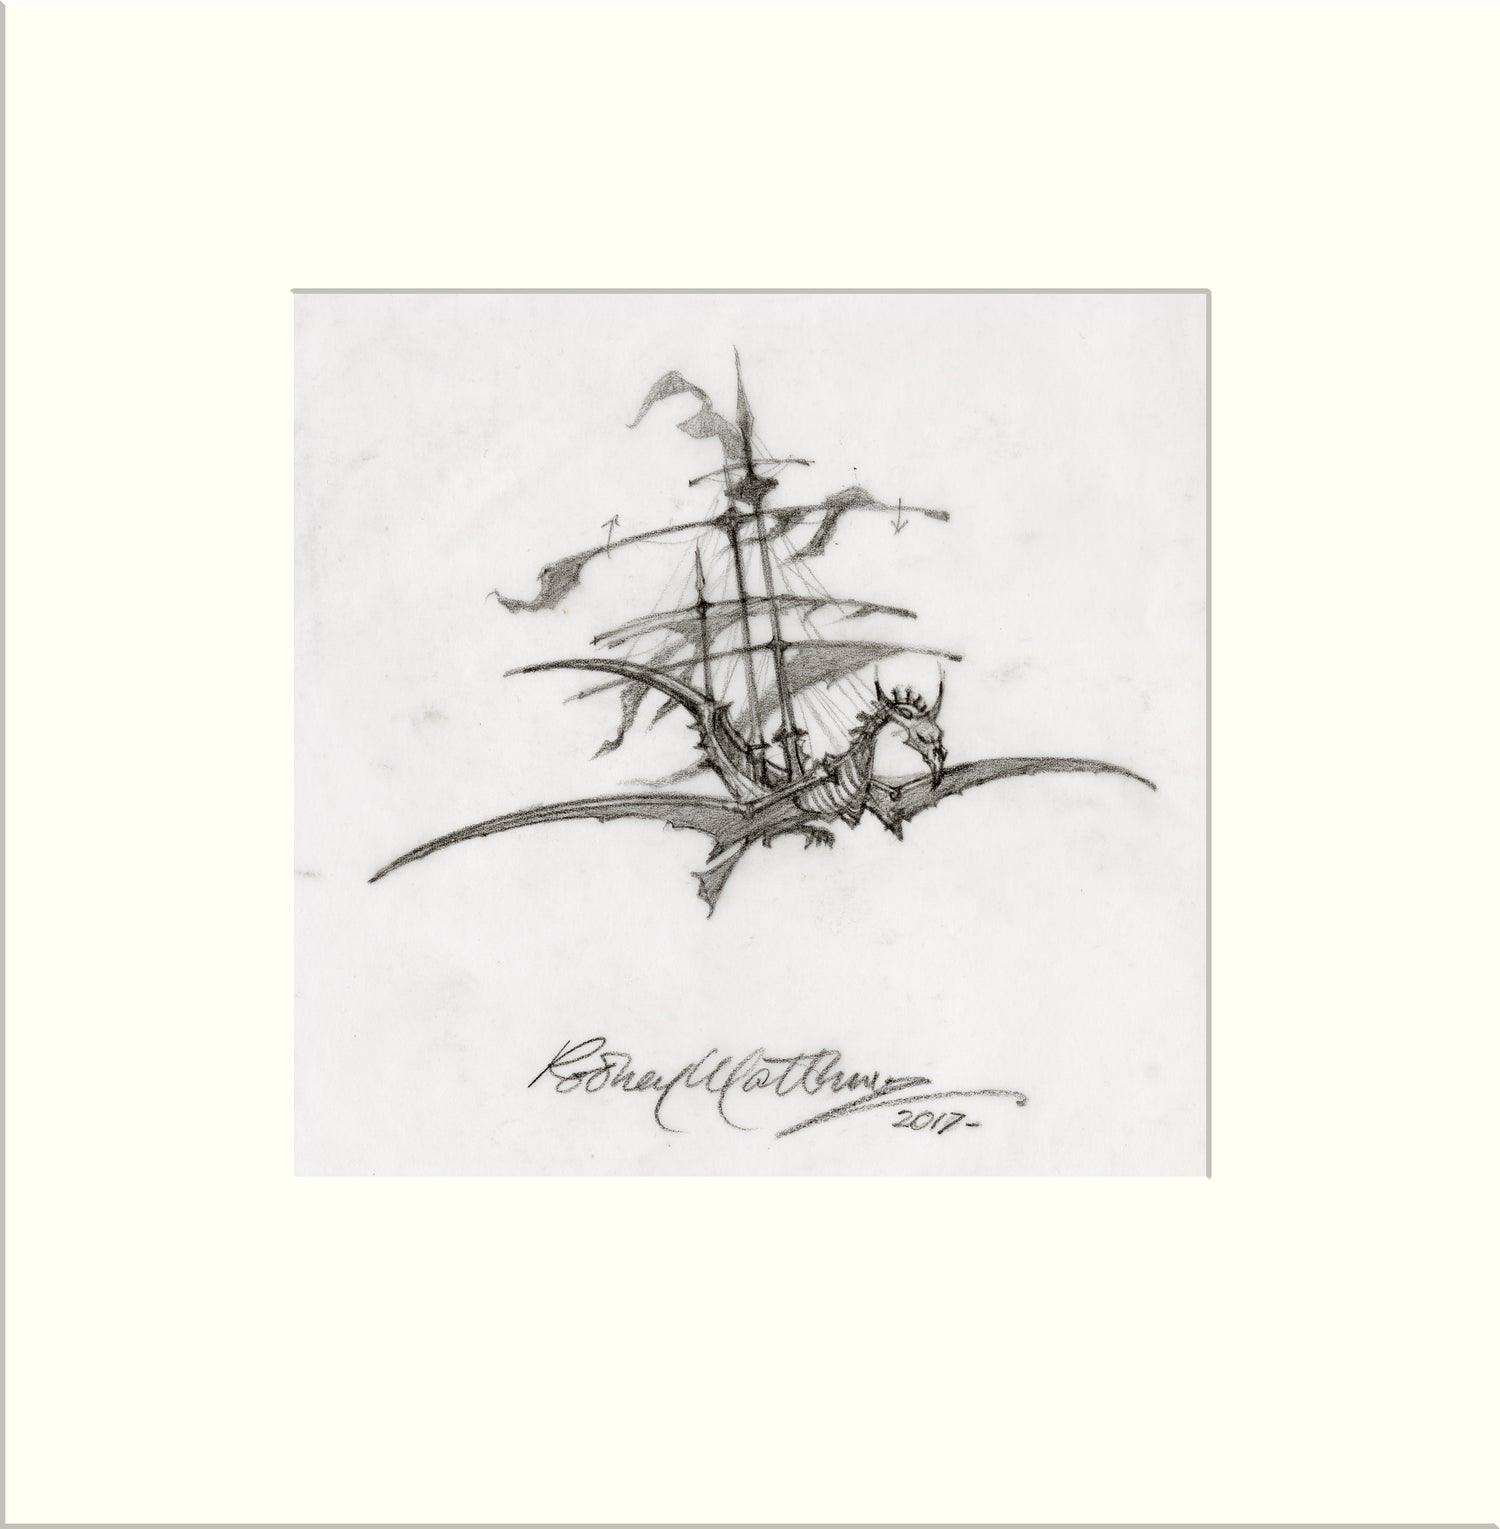 Detail from Painted Black: Skeletal Ship (The Rolling Stones) original pencil sketch by Rodney Matthews